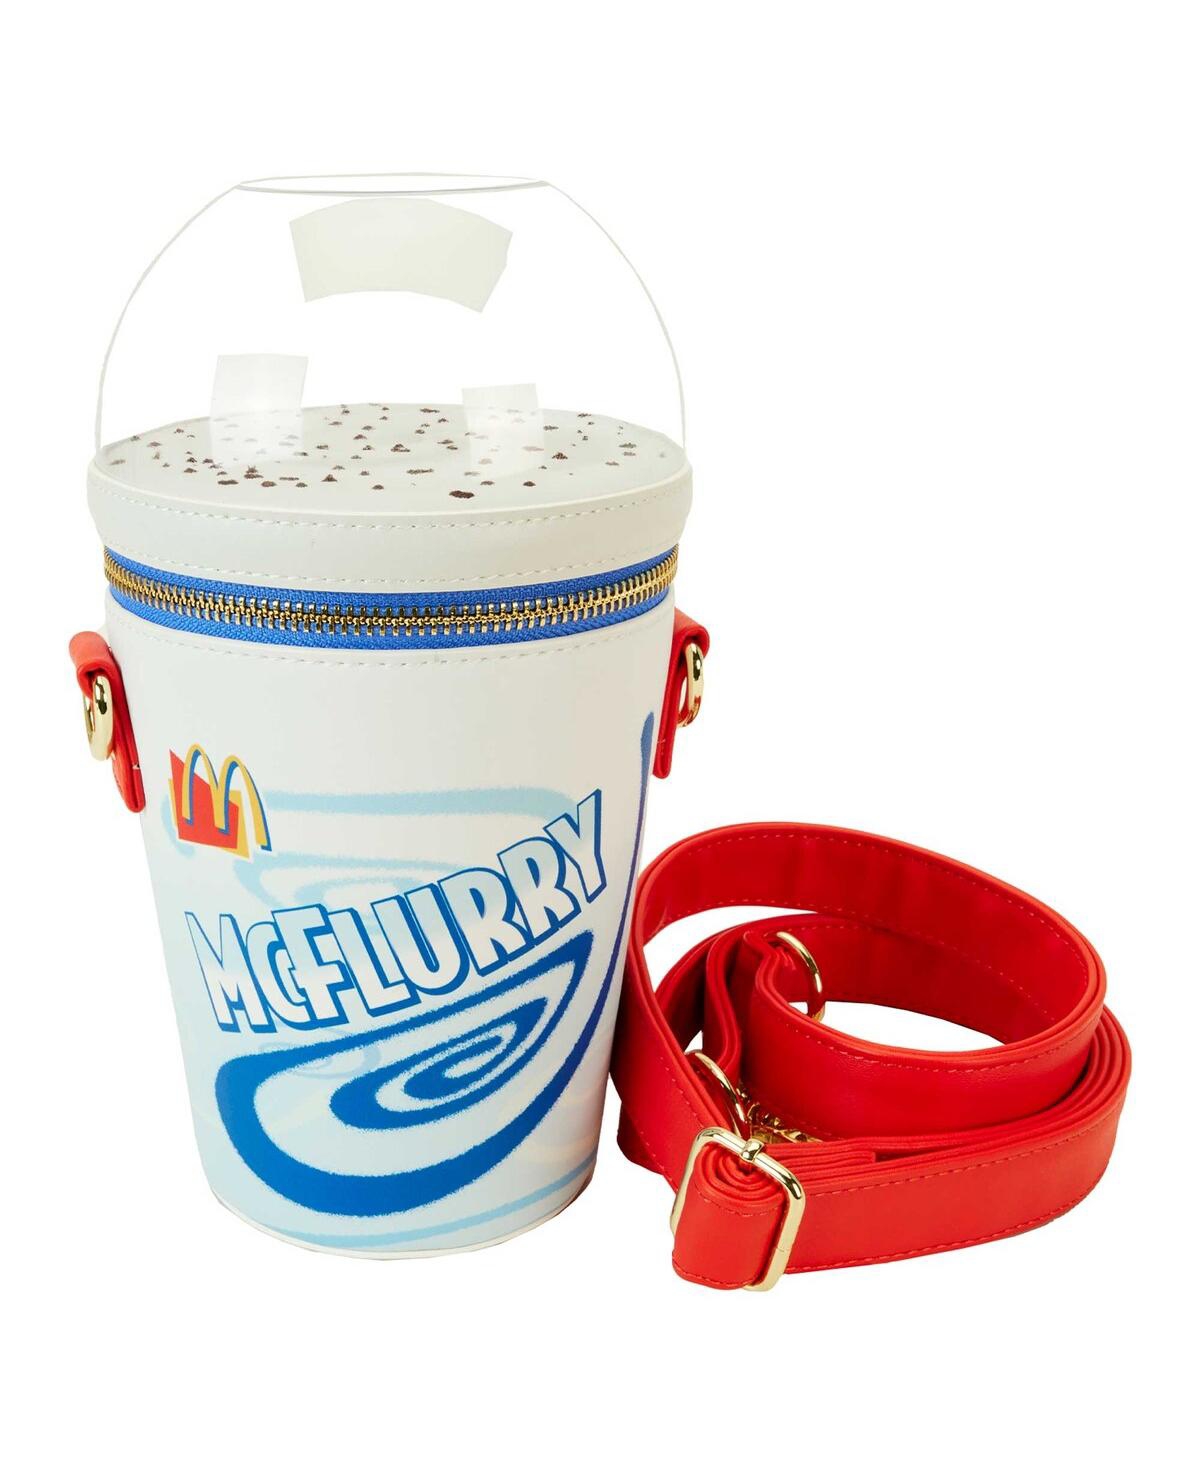 Loungefly Mcdonald's Mcflurry Crossbody Bag In No Color